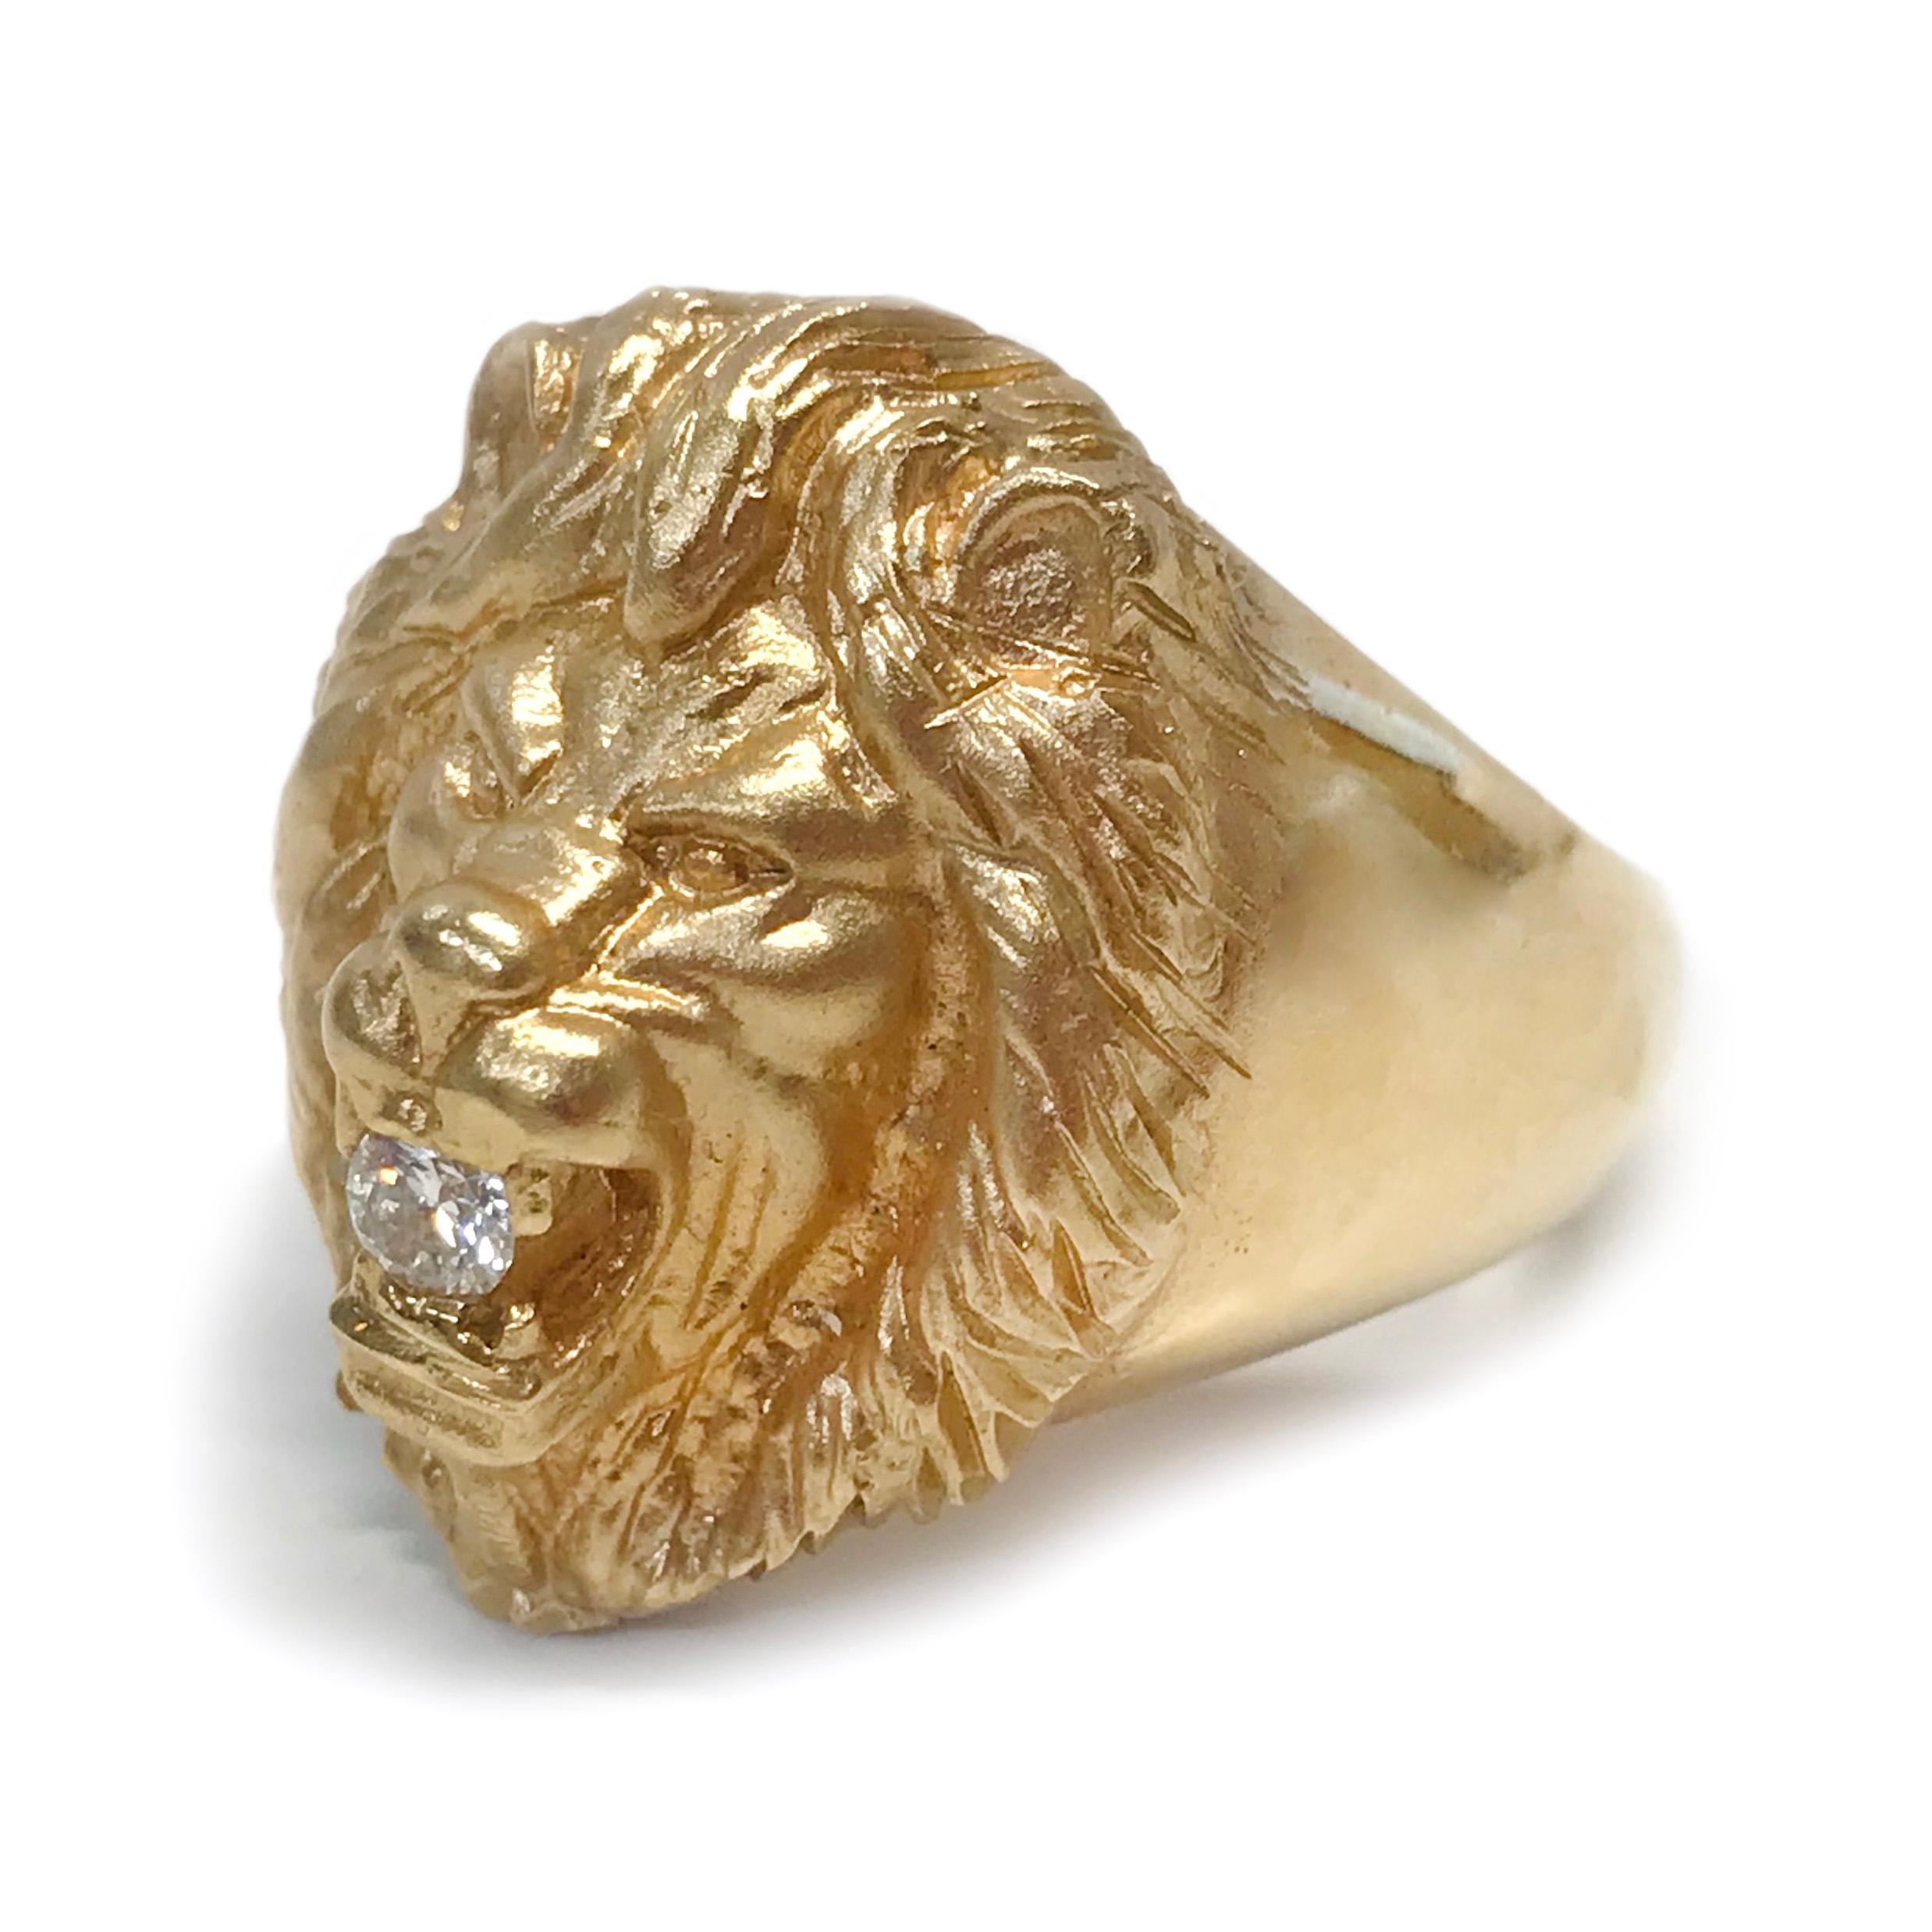 14 Karat Yellow Gold Diamond Lion Ring. This glorious ring features a detailed lion head and mane in a satin finish with a diamond set in the open mouth. The rest of the wideband tapers with a smooth finish. The round diamond has a total weight of